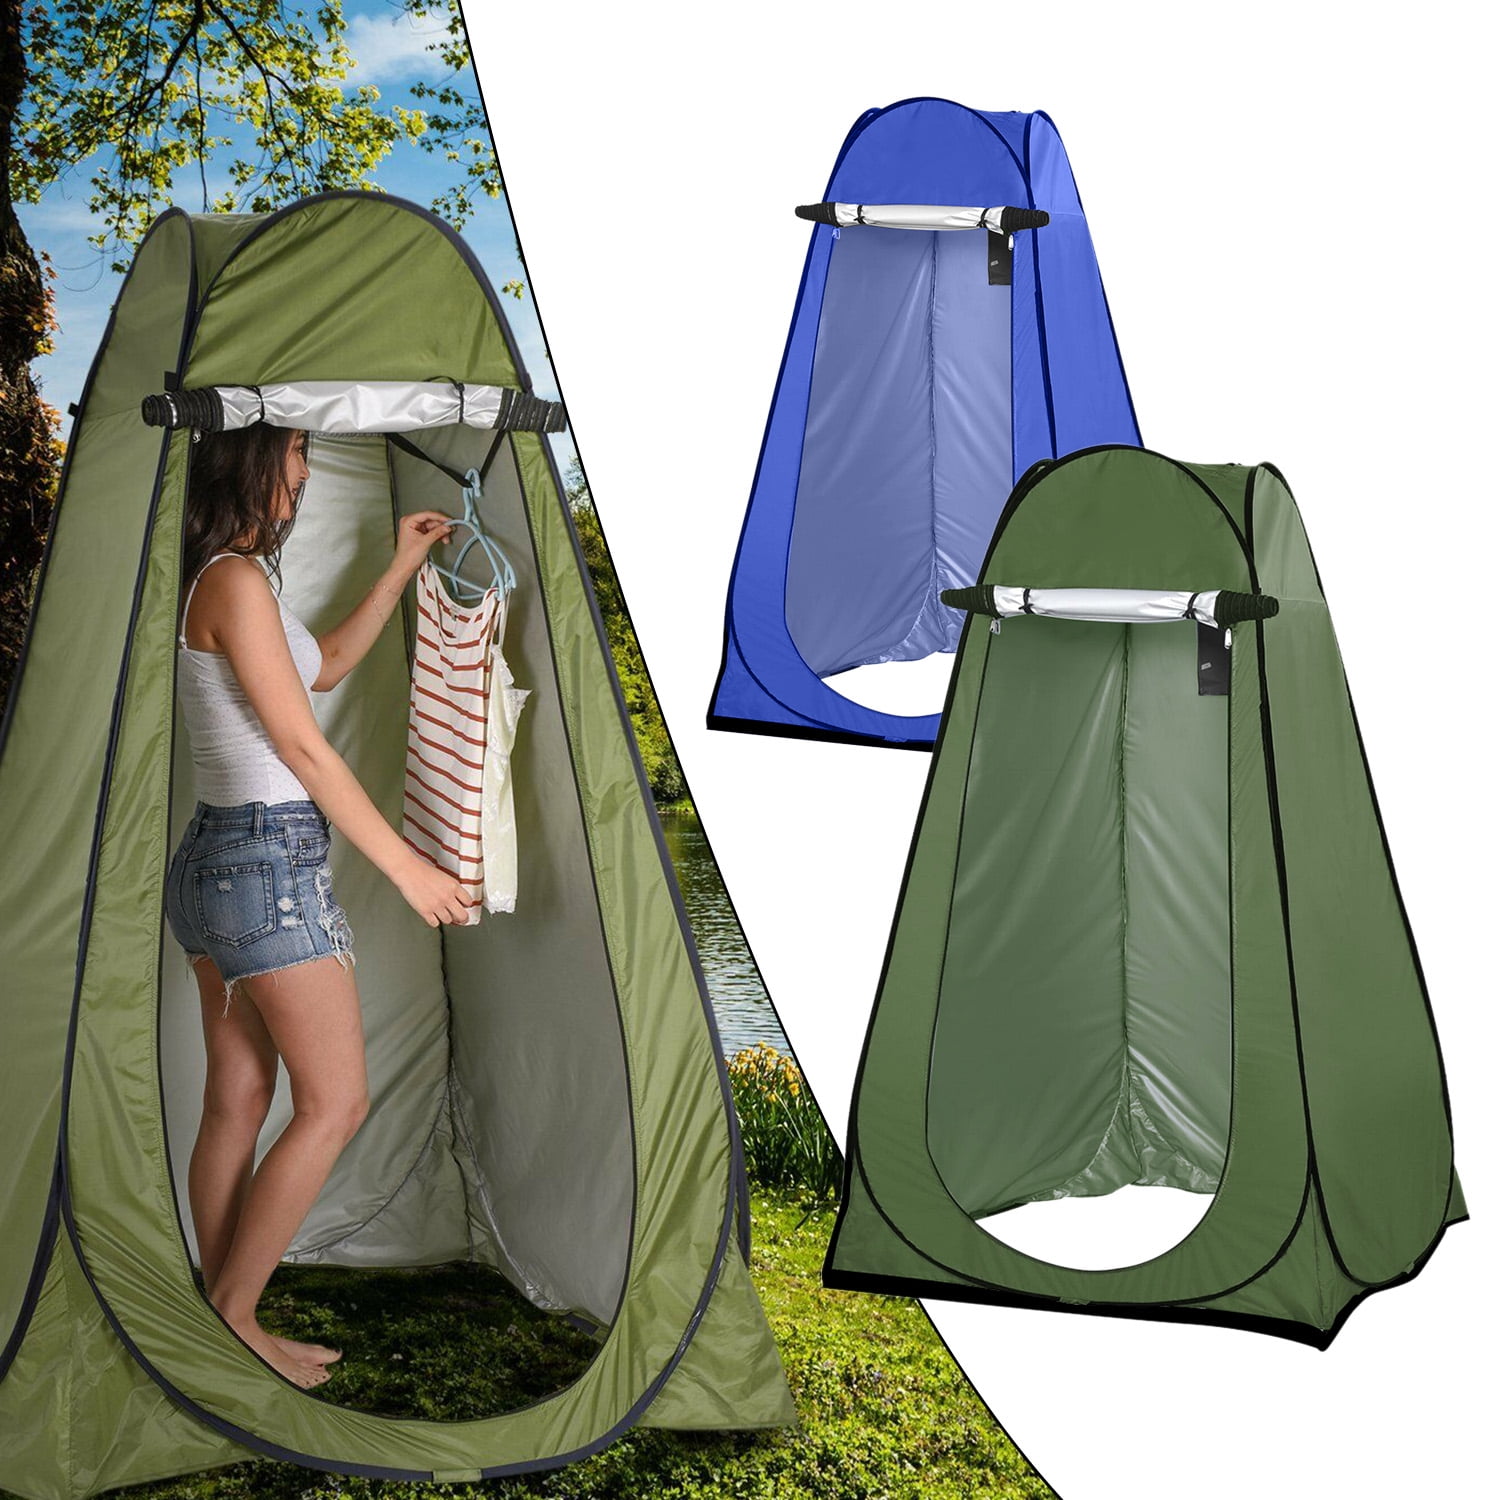 Privacy Tent For Portable Toilet with Folding Camping Toilet Chair Commode Pop Up Potty Camping Privacy Shelters Instant Portable Outdoor Shower Tent,Rain Shelter for Camping Beach Changing Dress Room